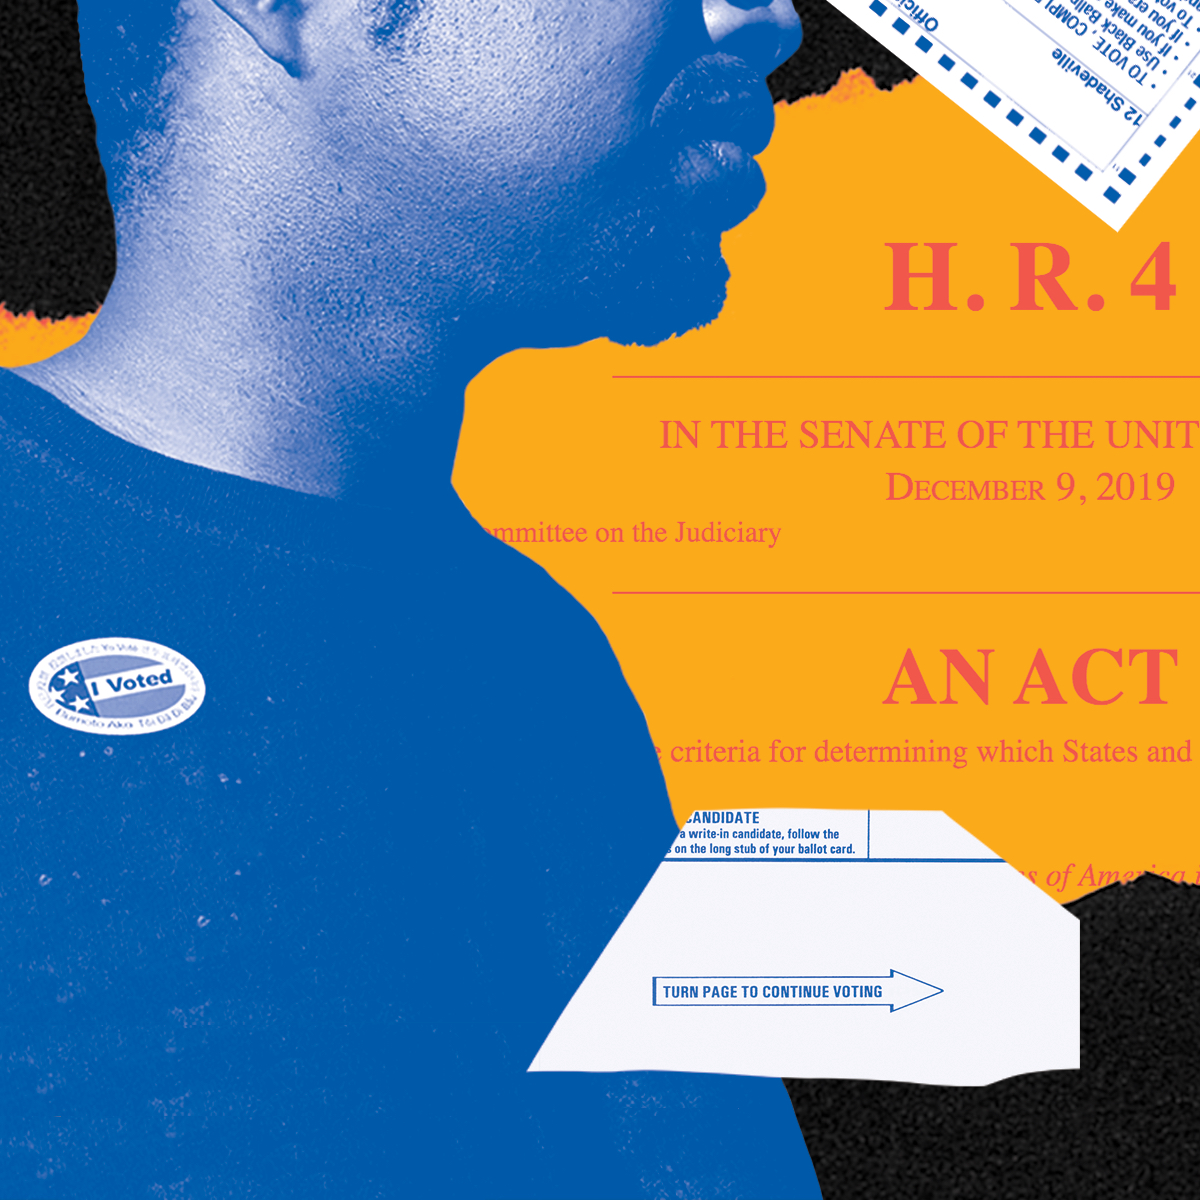 Collage graphic of the Congressional bill, Voting Rights Advancement Act, overlaid with a man wearing a black shirt and a small "I Voted" sticker.